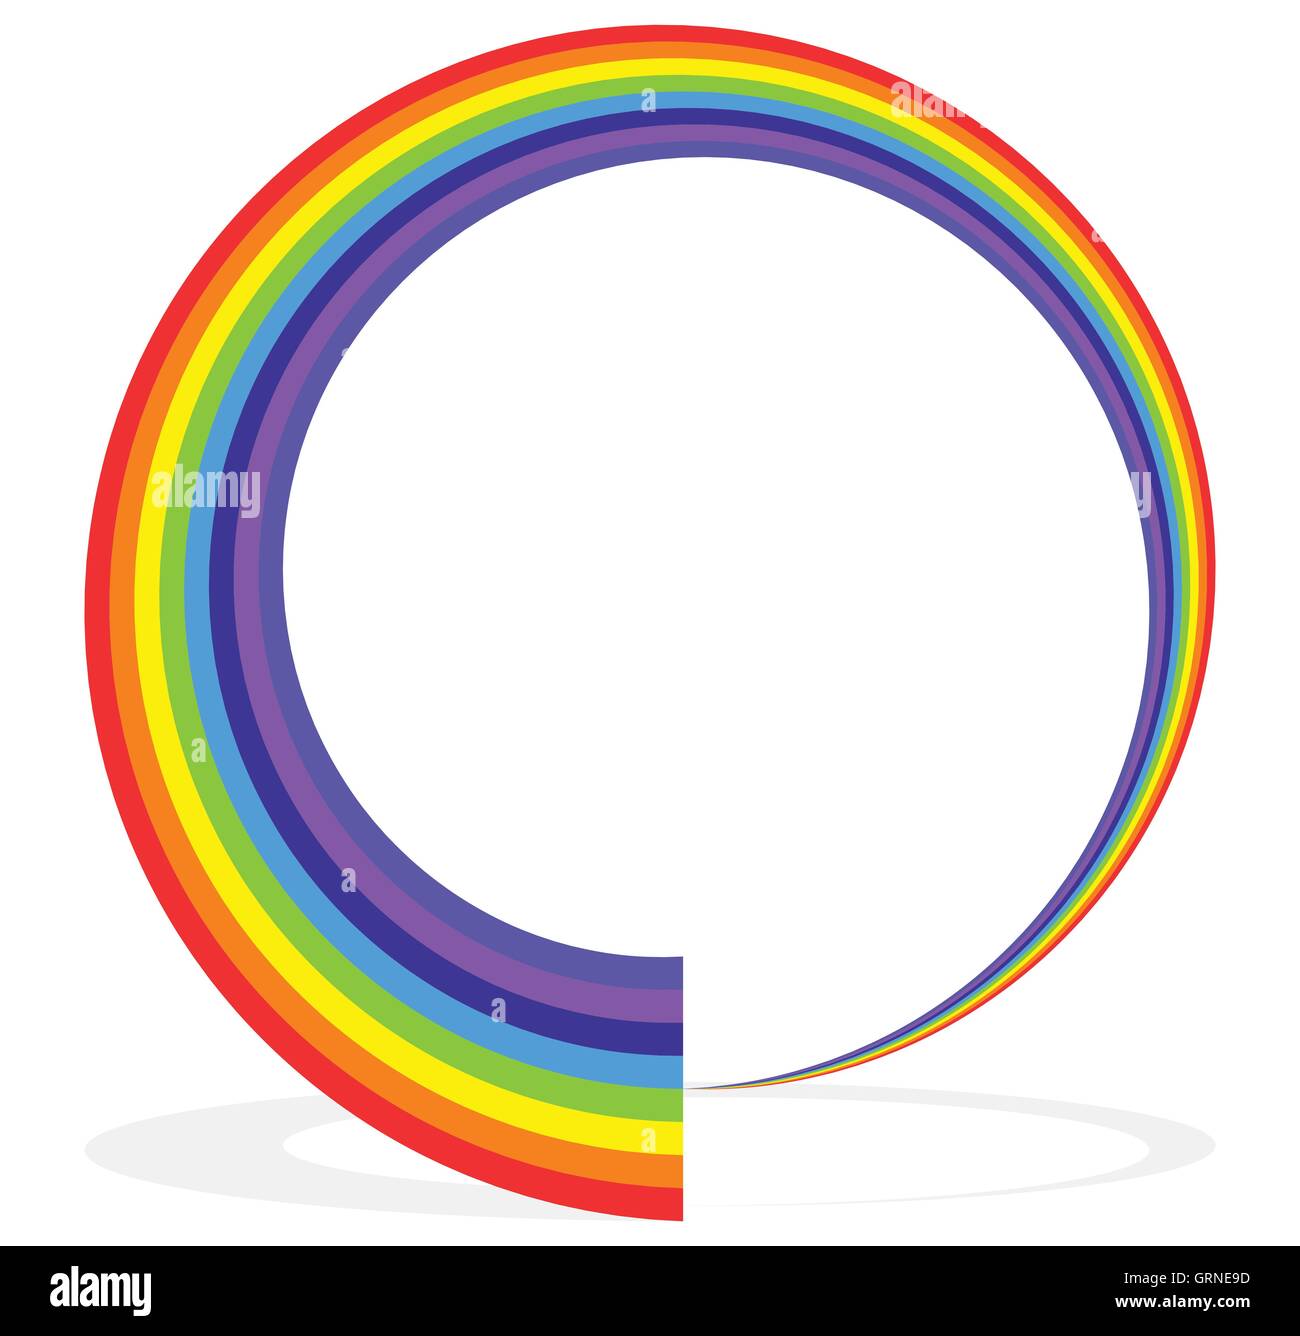 Download Circular rainbow shape (frame, border, element) with ...